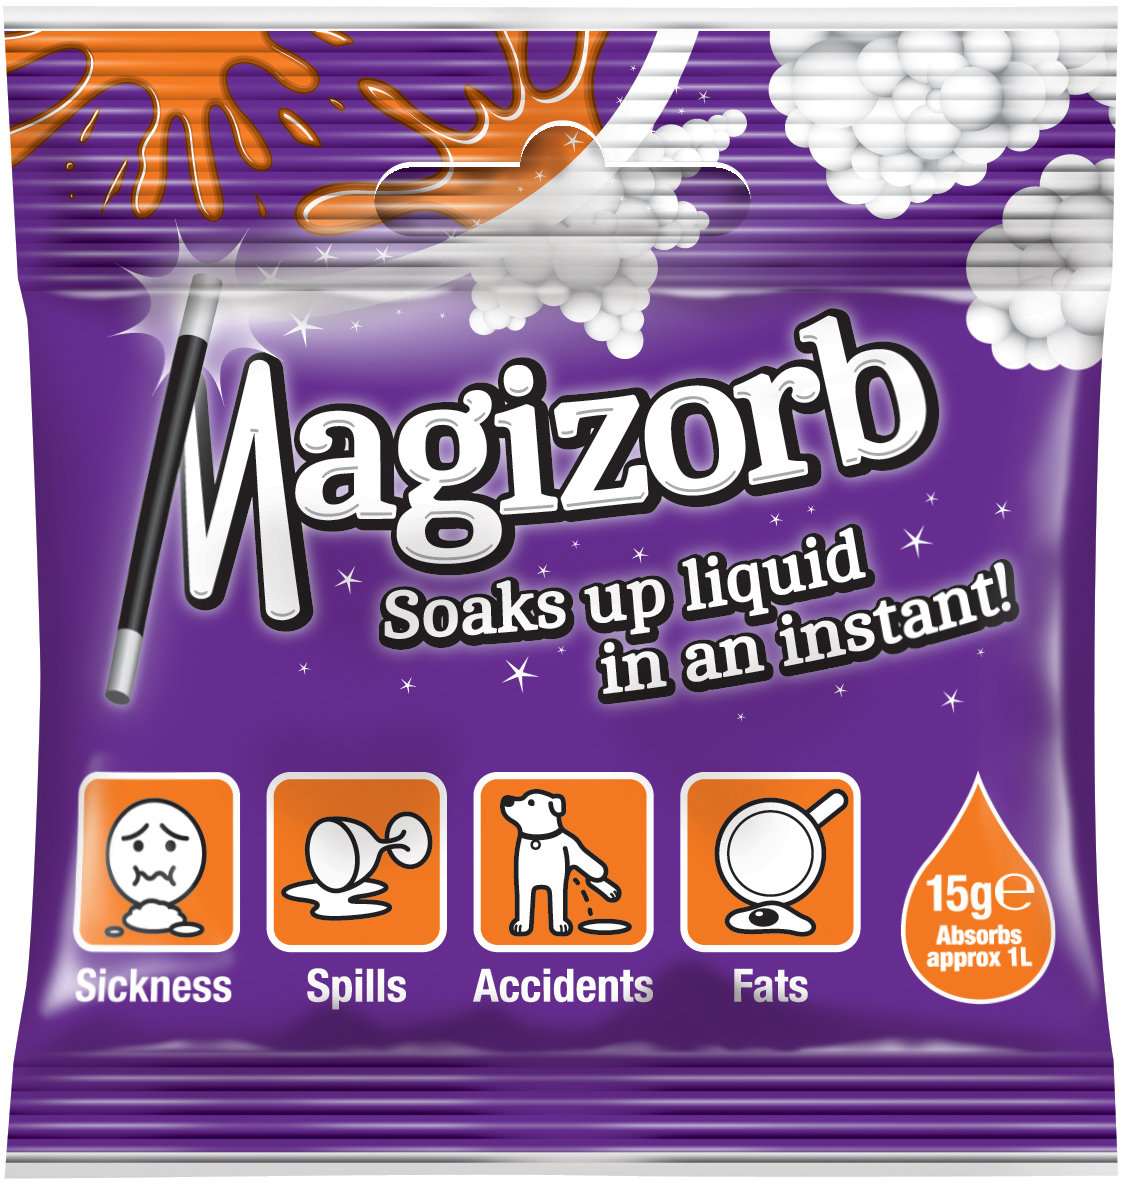 Magizorb 15g sachet (price includes delivery)